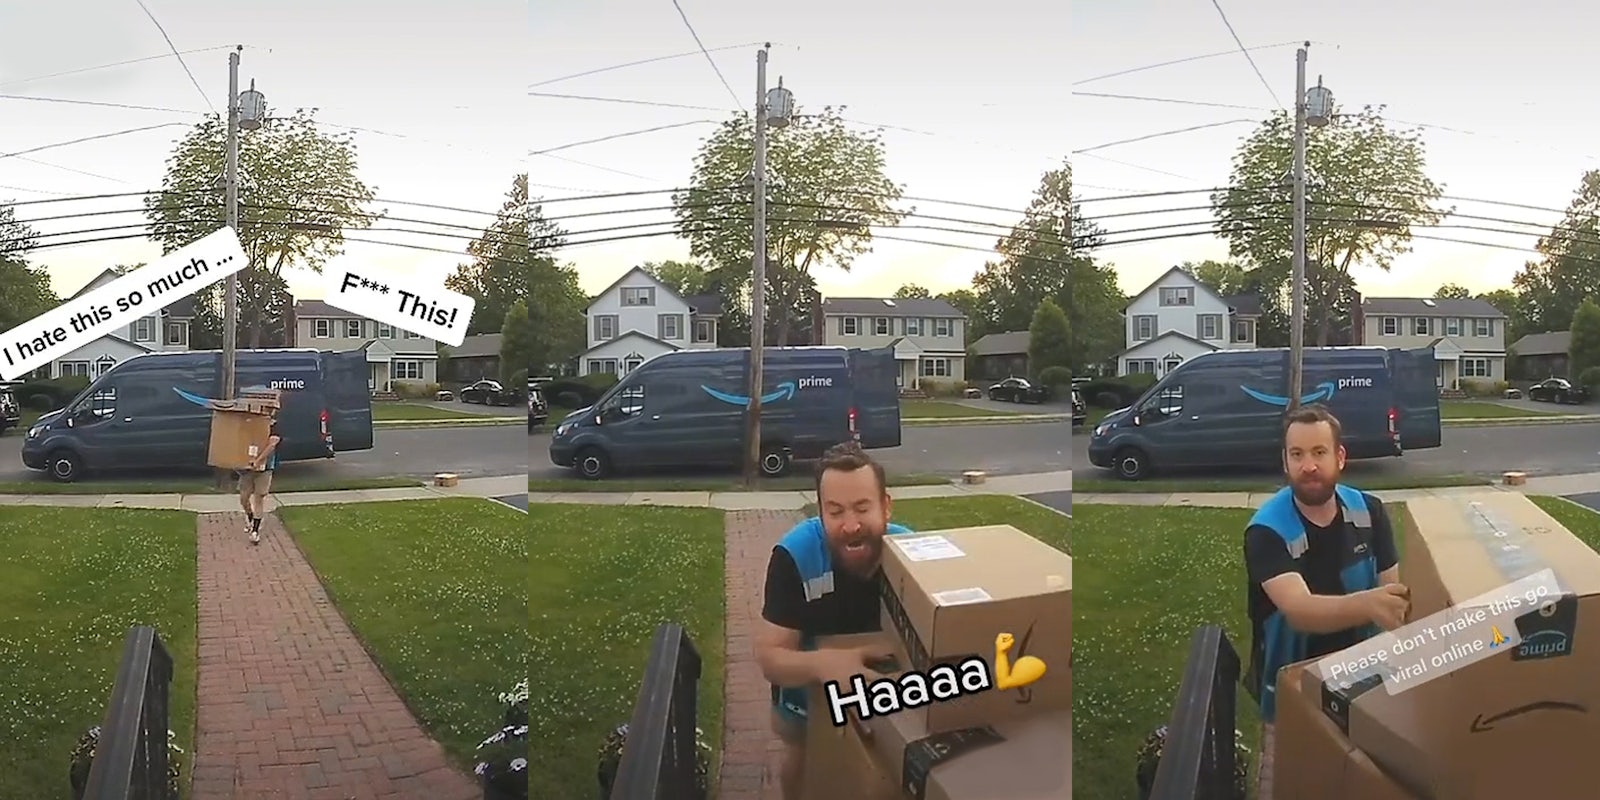 Amazon driver carrying boxes captions 'I hate this so much... 'F*** This!' (l) Amazon putting boxes on steps yelling the caption 'Haaaa' (c) Amazon driver placing boxes on steps looking and speaking to doorbell camera caption 'Please don't make this go viral online' (r)